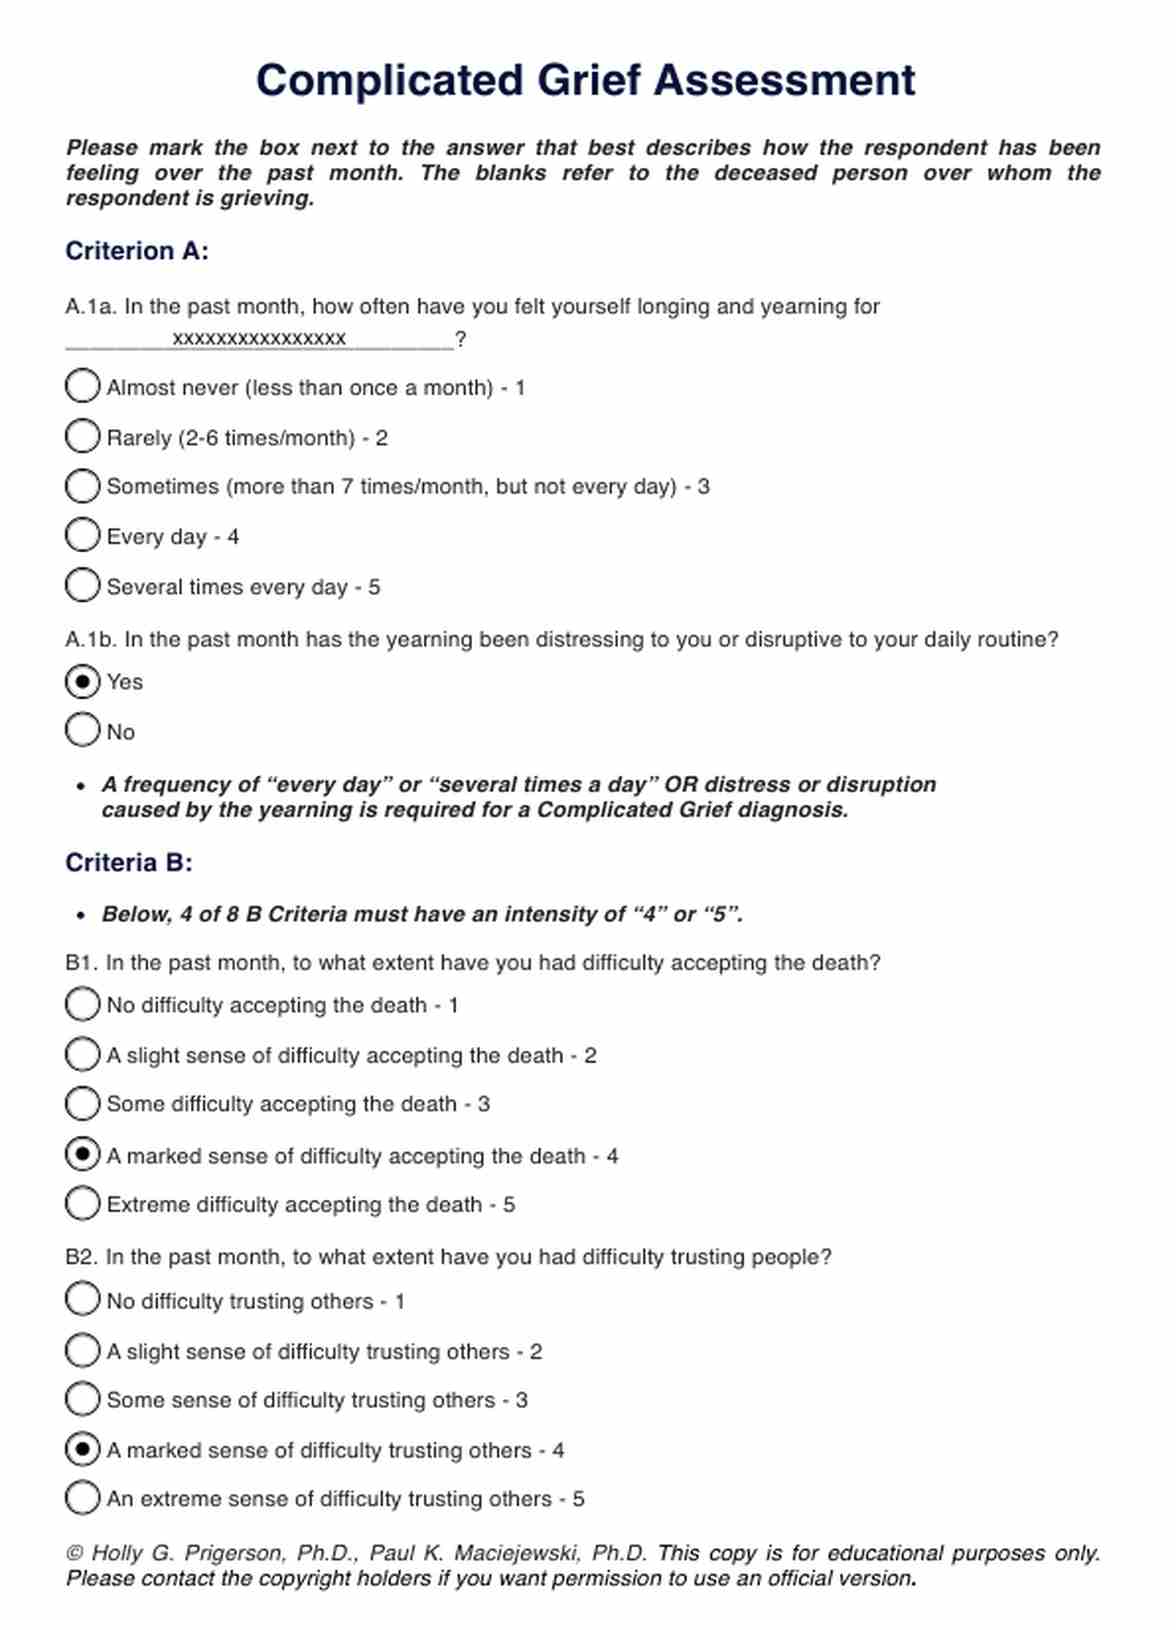 Complicated Grief Disorder Test PDF Example